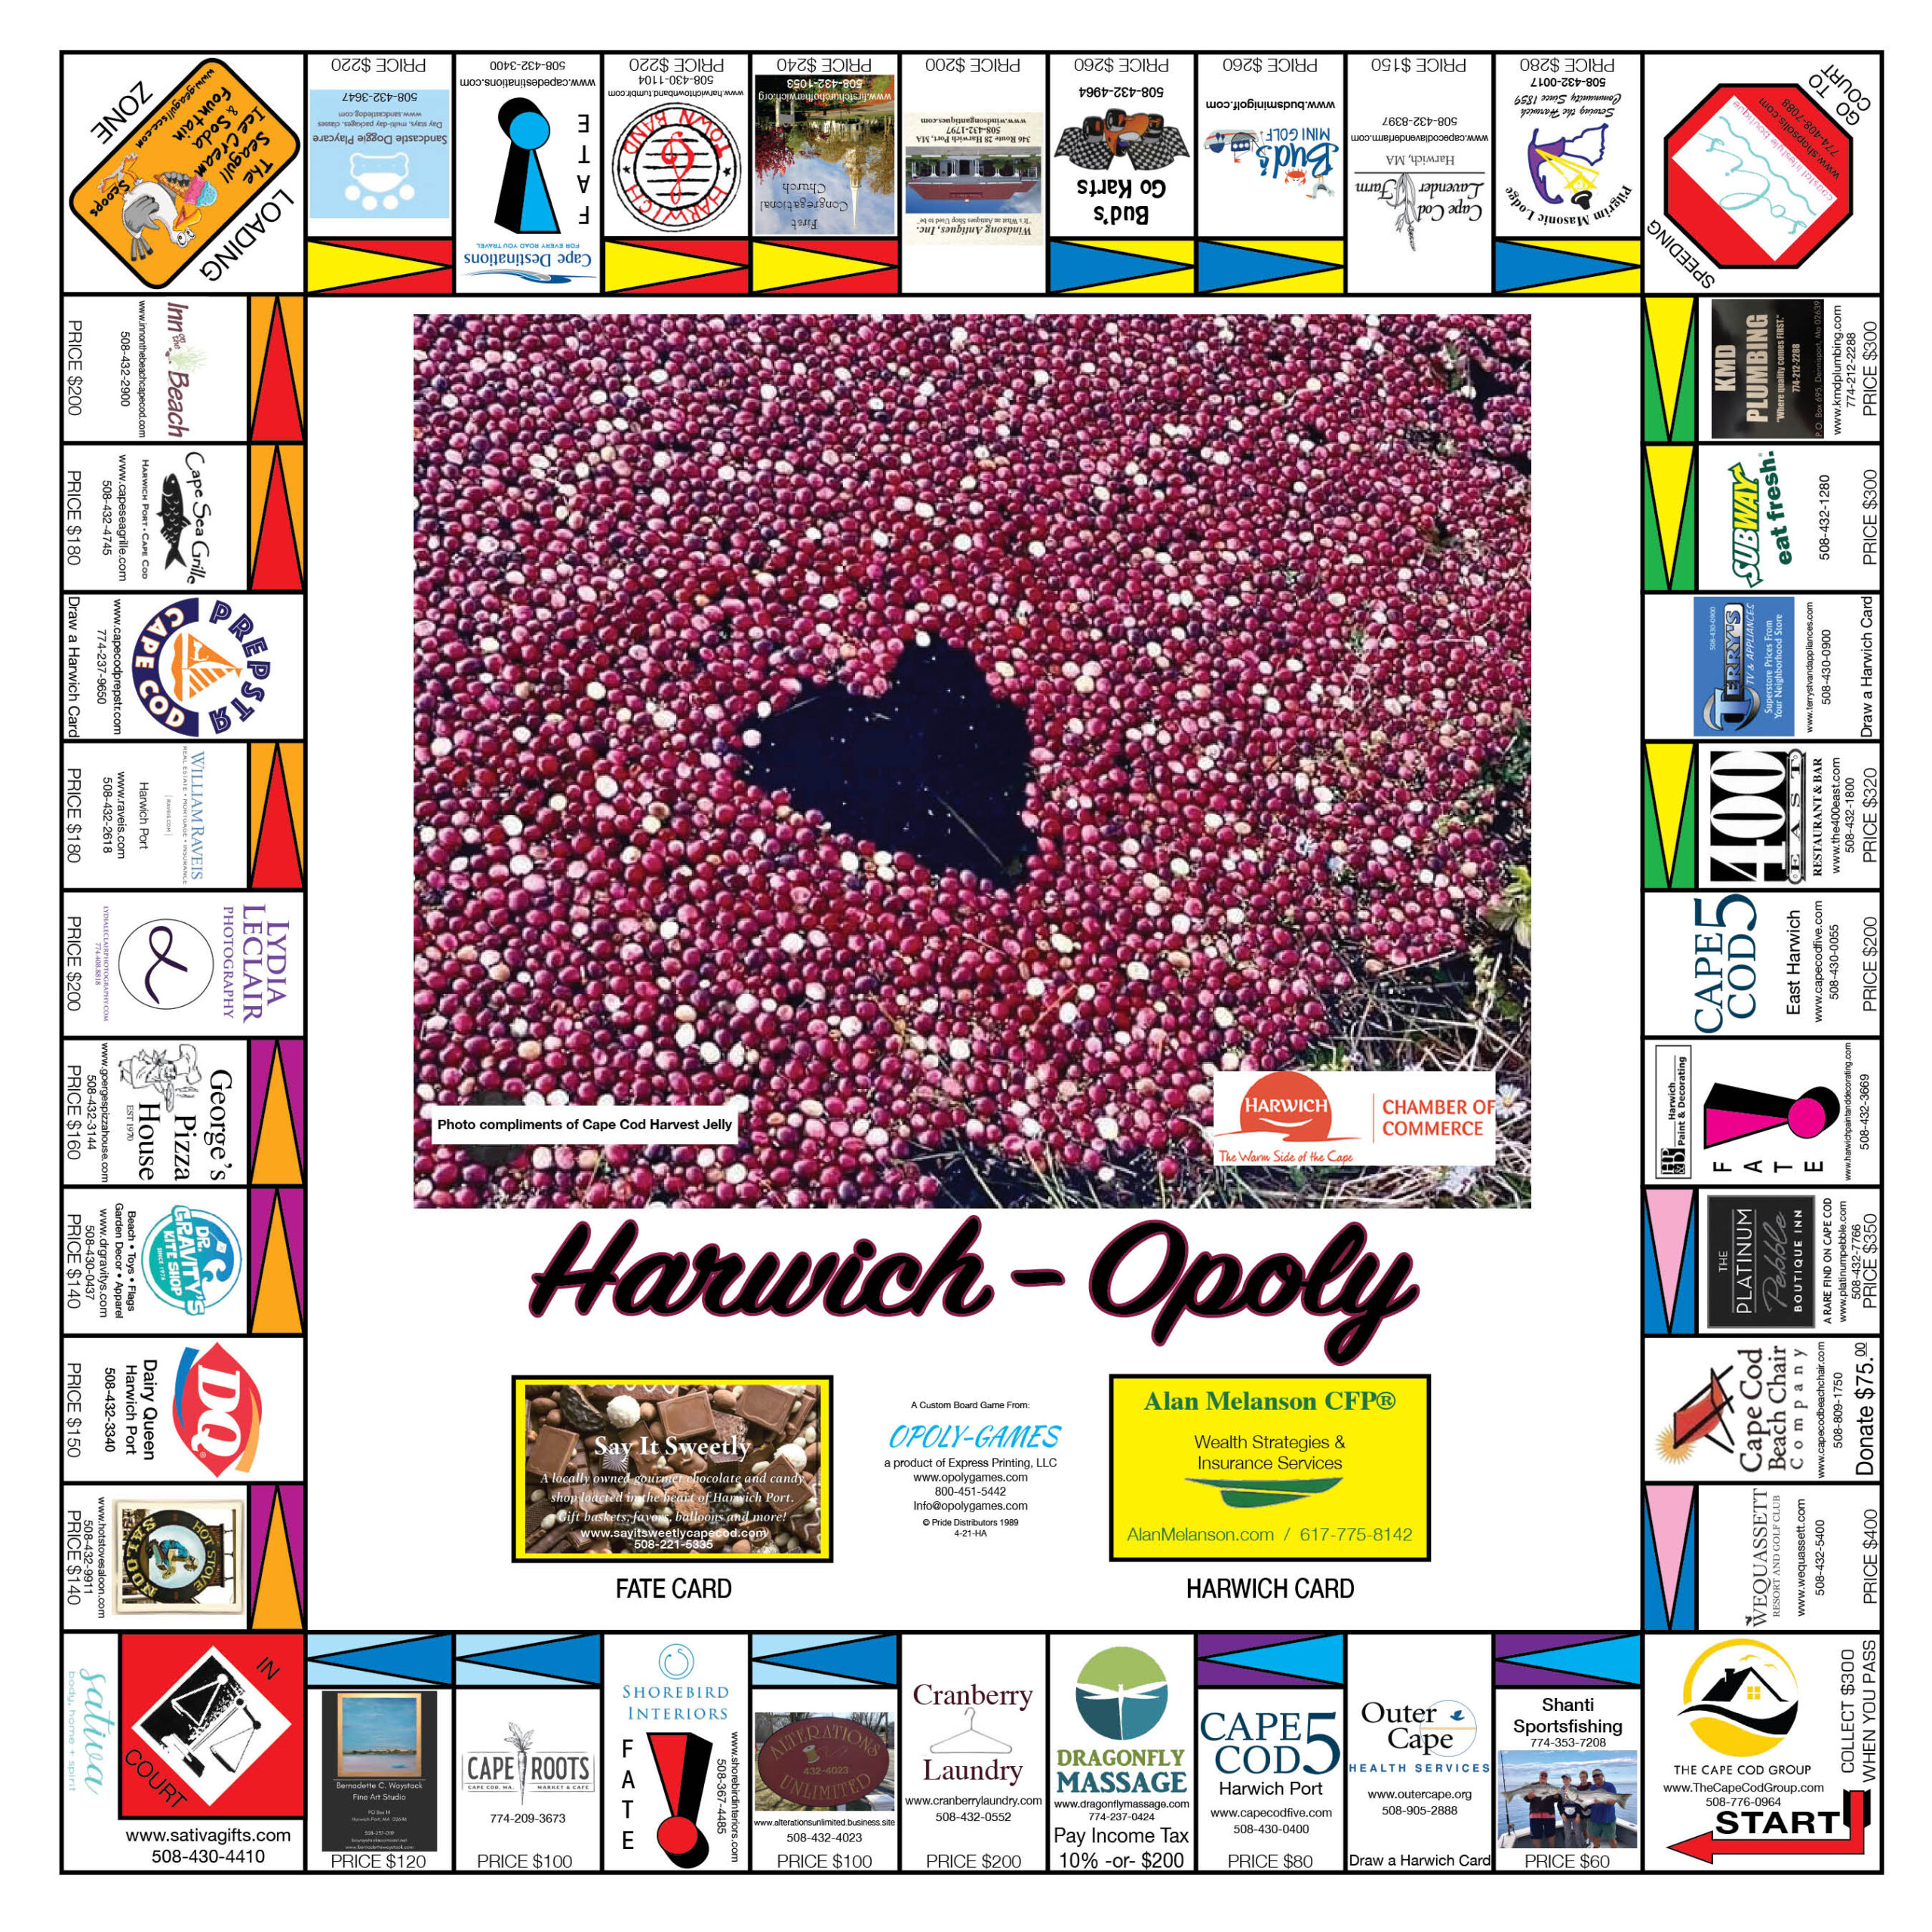 Photo of Harwich-Opoly game